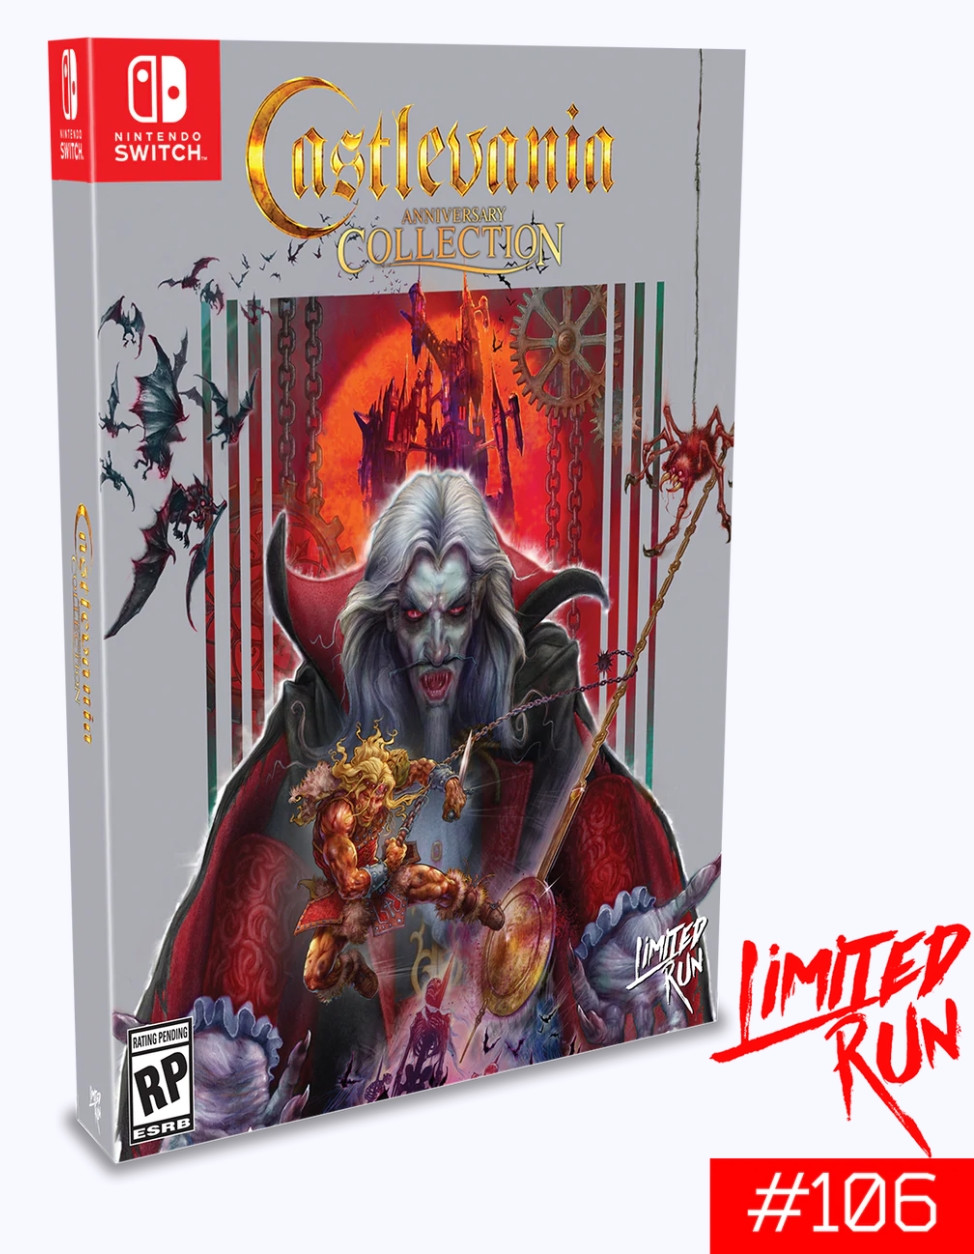 Castlevania - Anniversary Collection Classic Edition (Limited Run Games) - Nintendo Switch